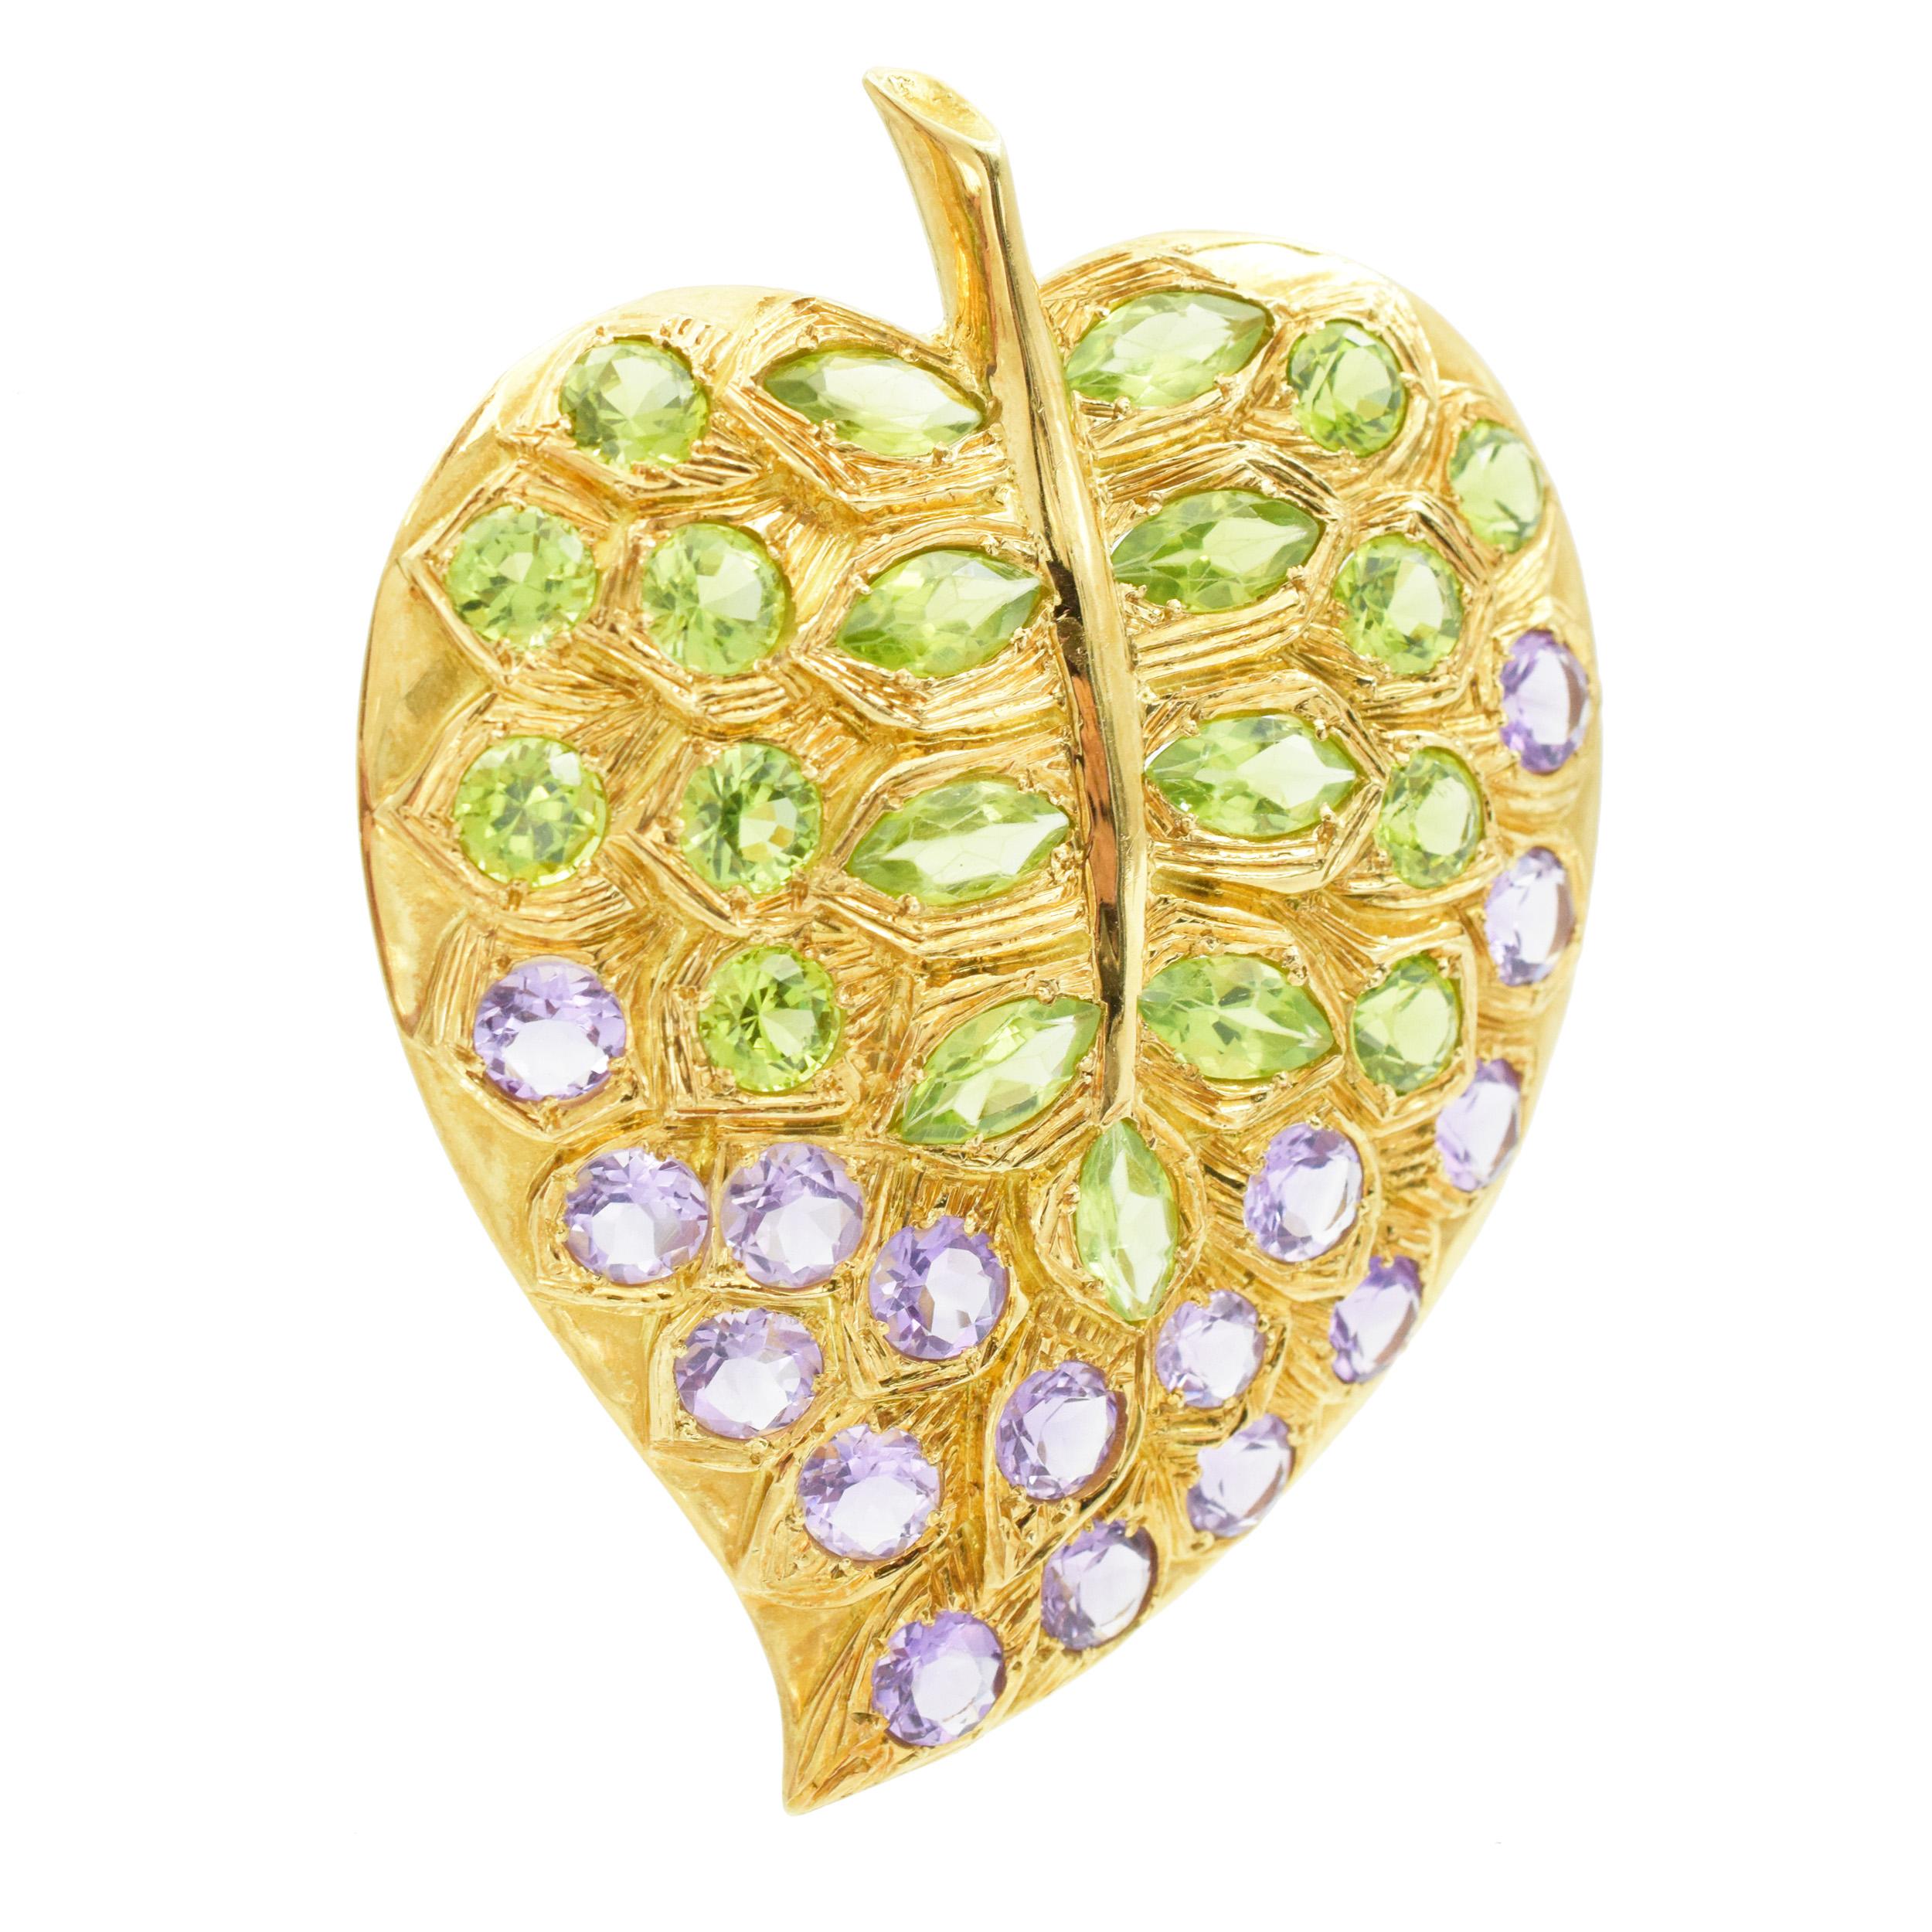 Pair of Amethyst and Peridot Leaf Brooches 3